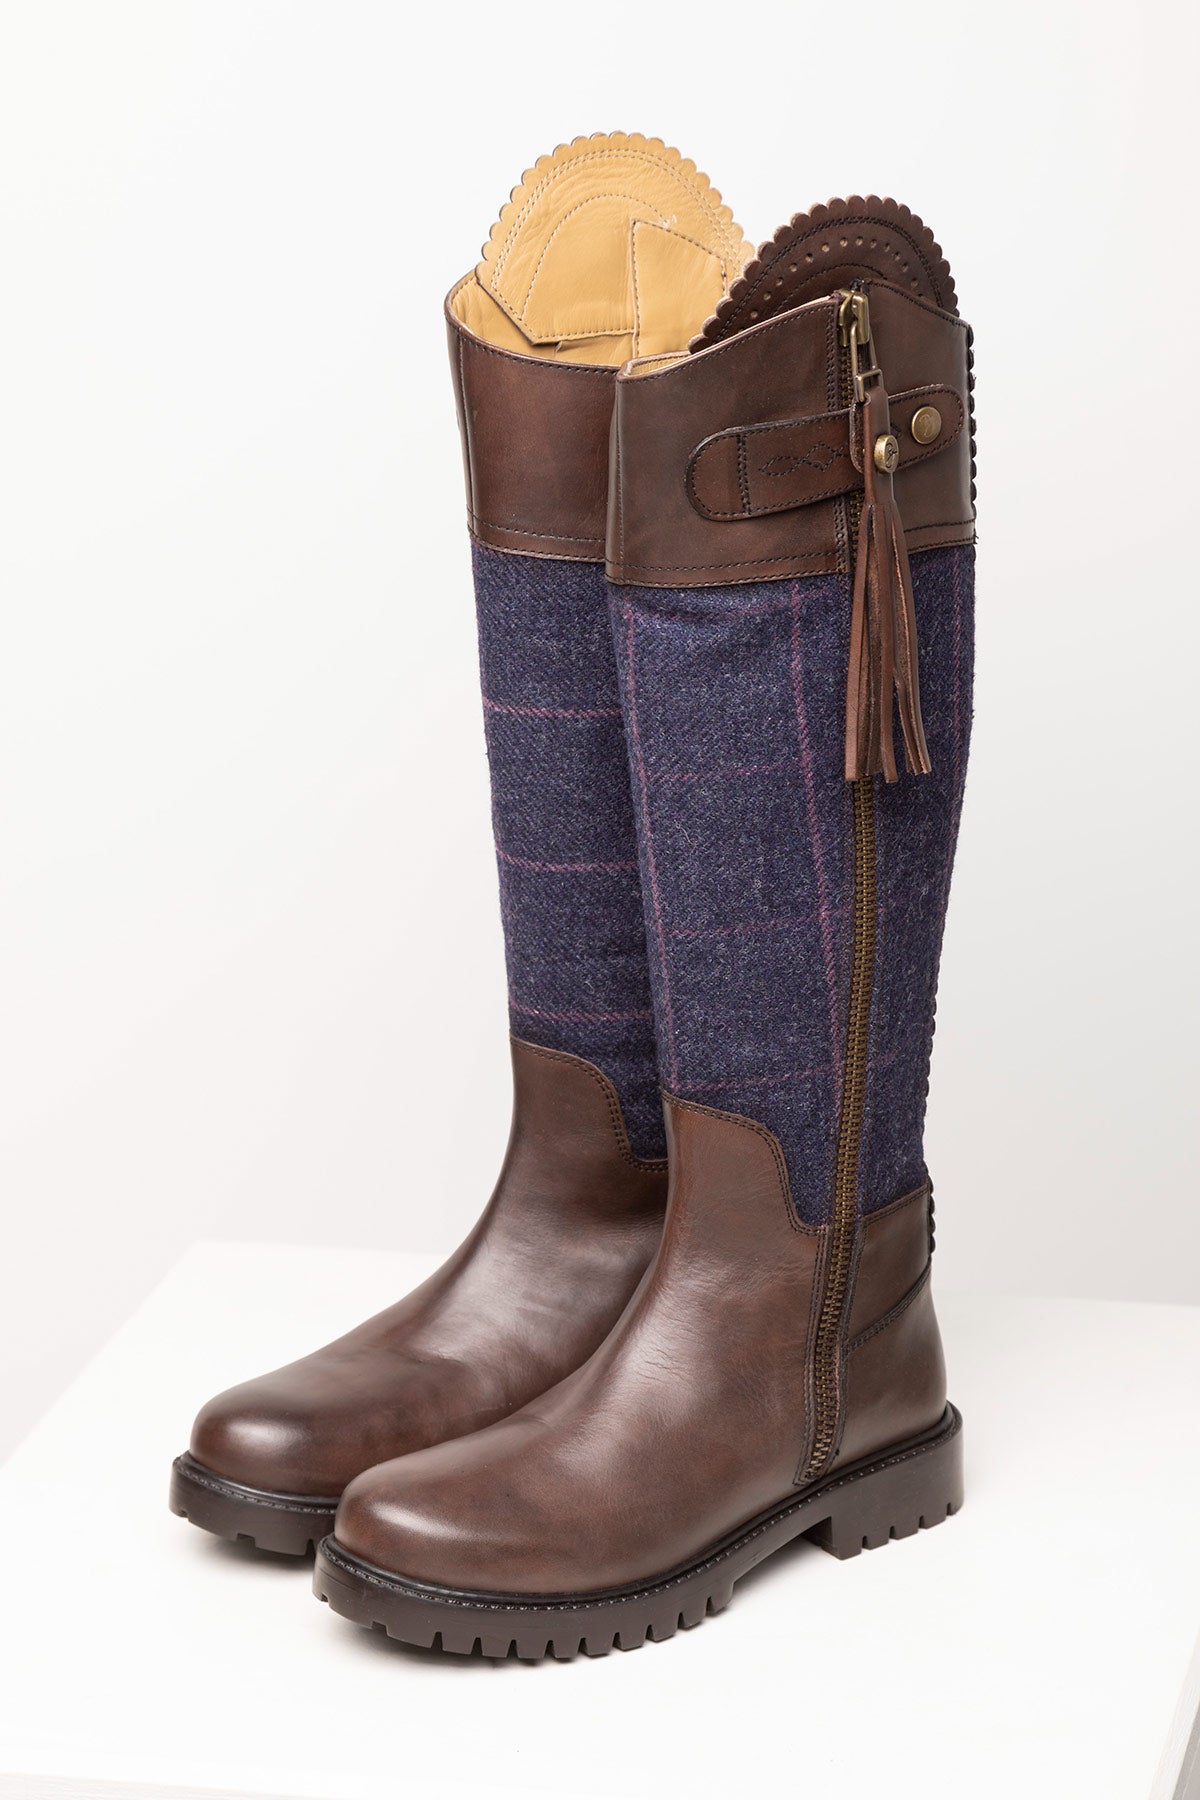 Ladies Tall Tweed & Leather Boots UK | Rydale